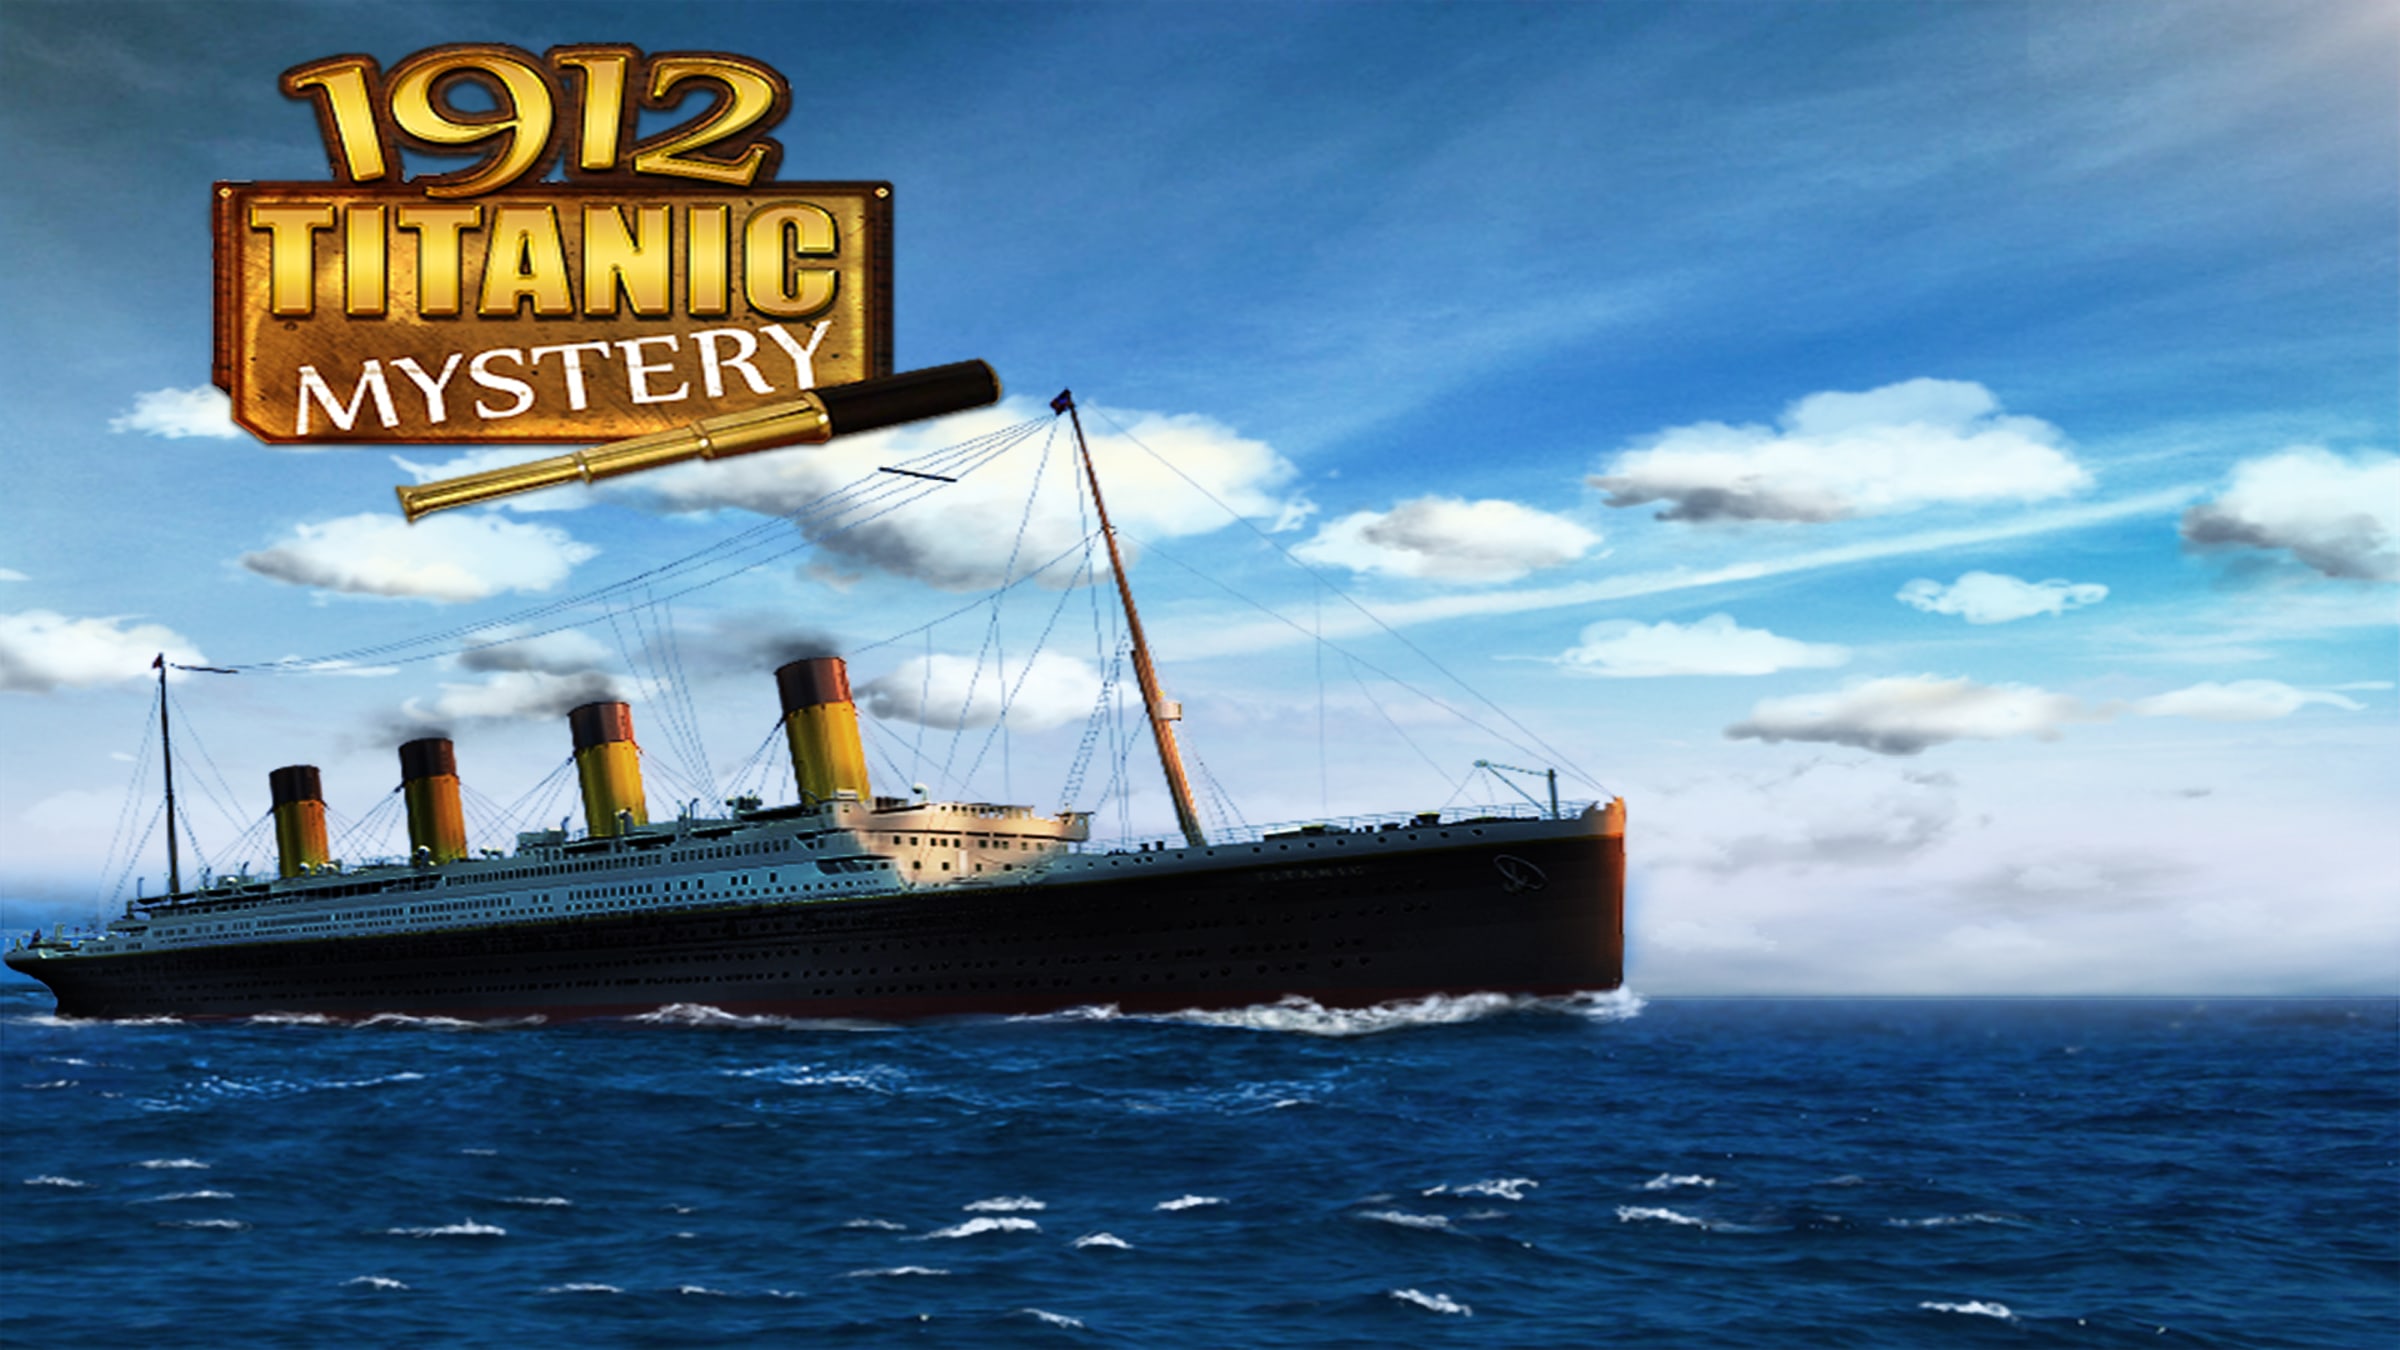 1912: Titanic Mystery for Nintendo Switch - Nintendo Official Site